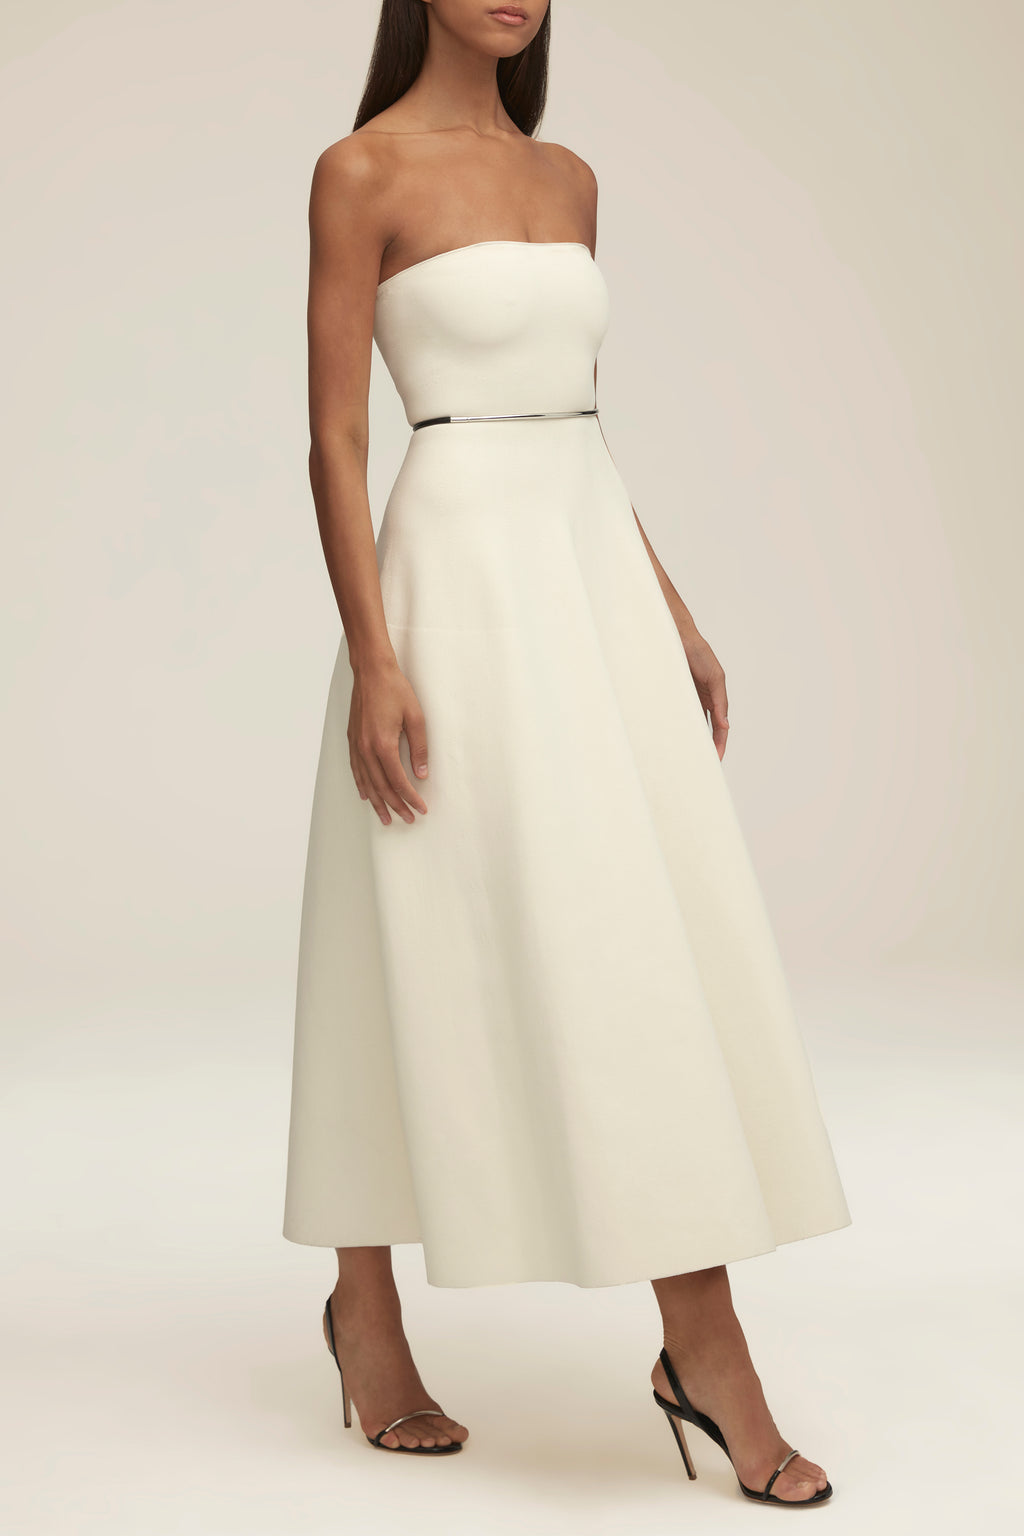 The Berry Dress in Ivory – BRANDON MAXWELL